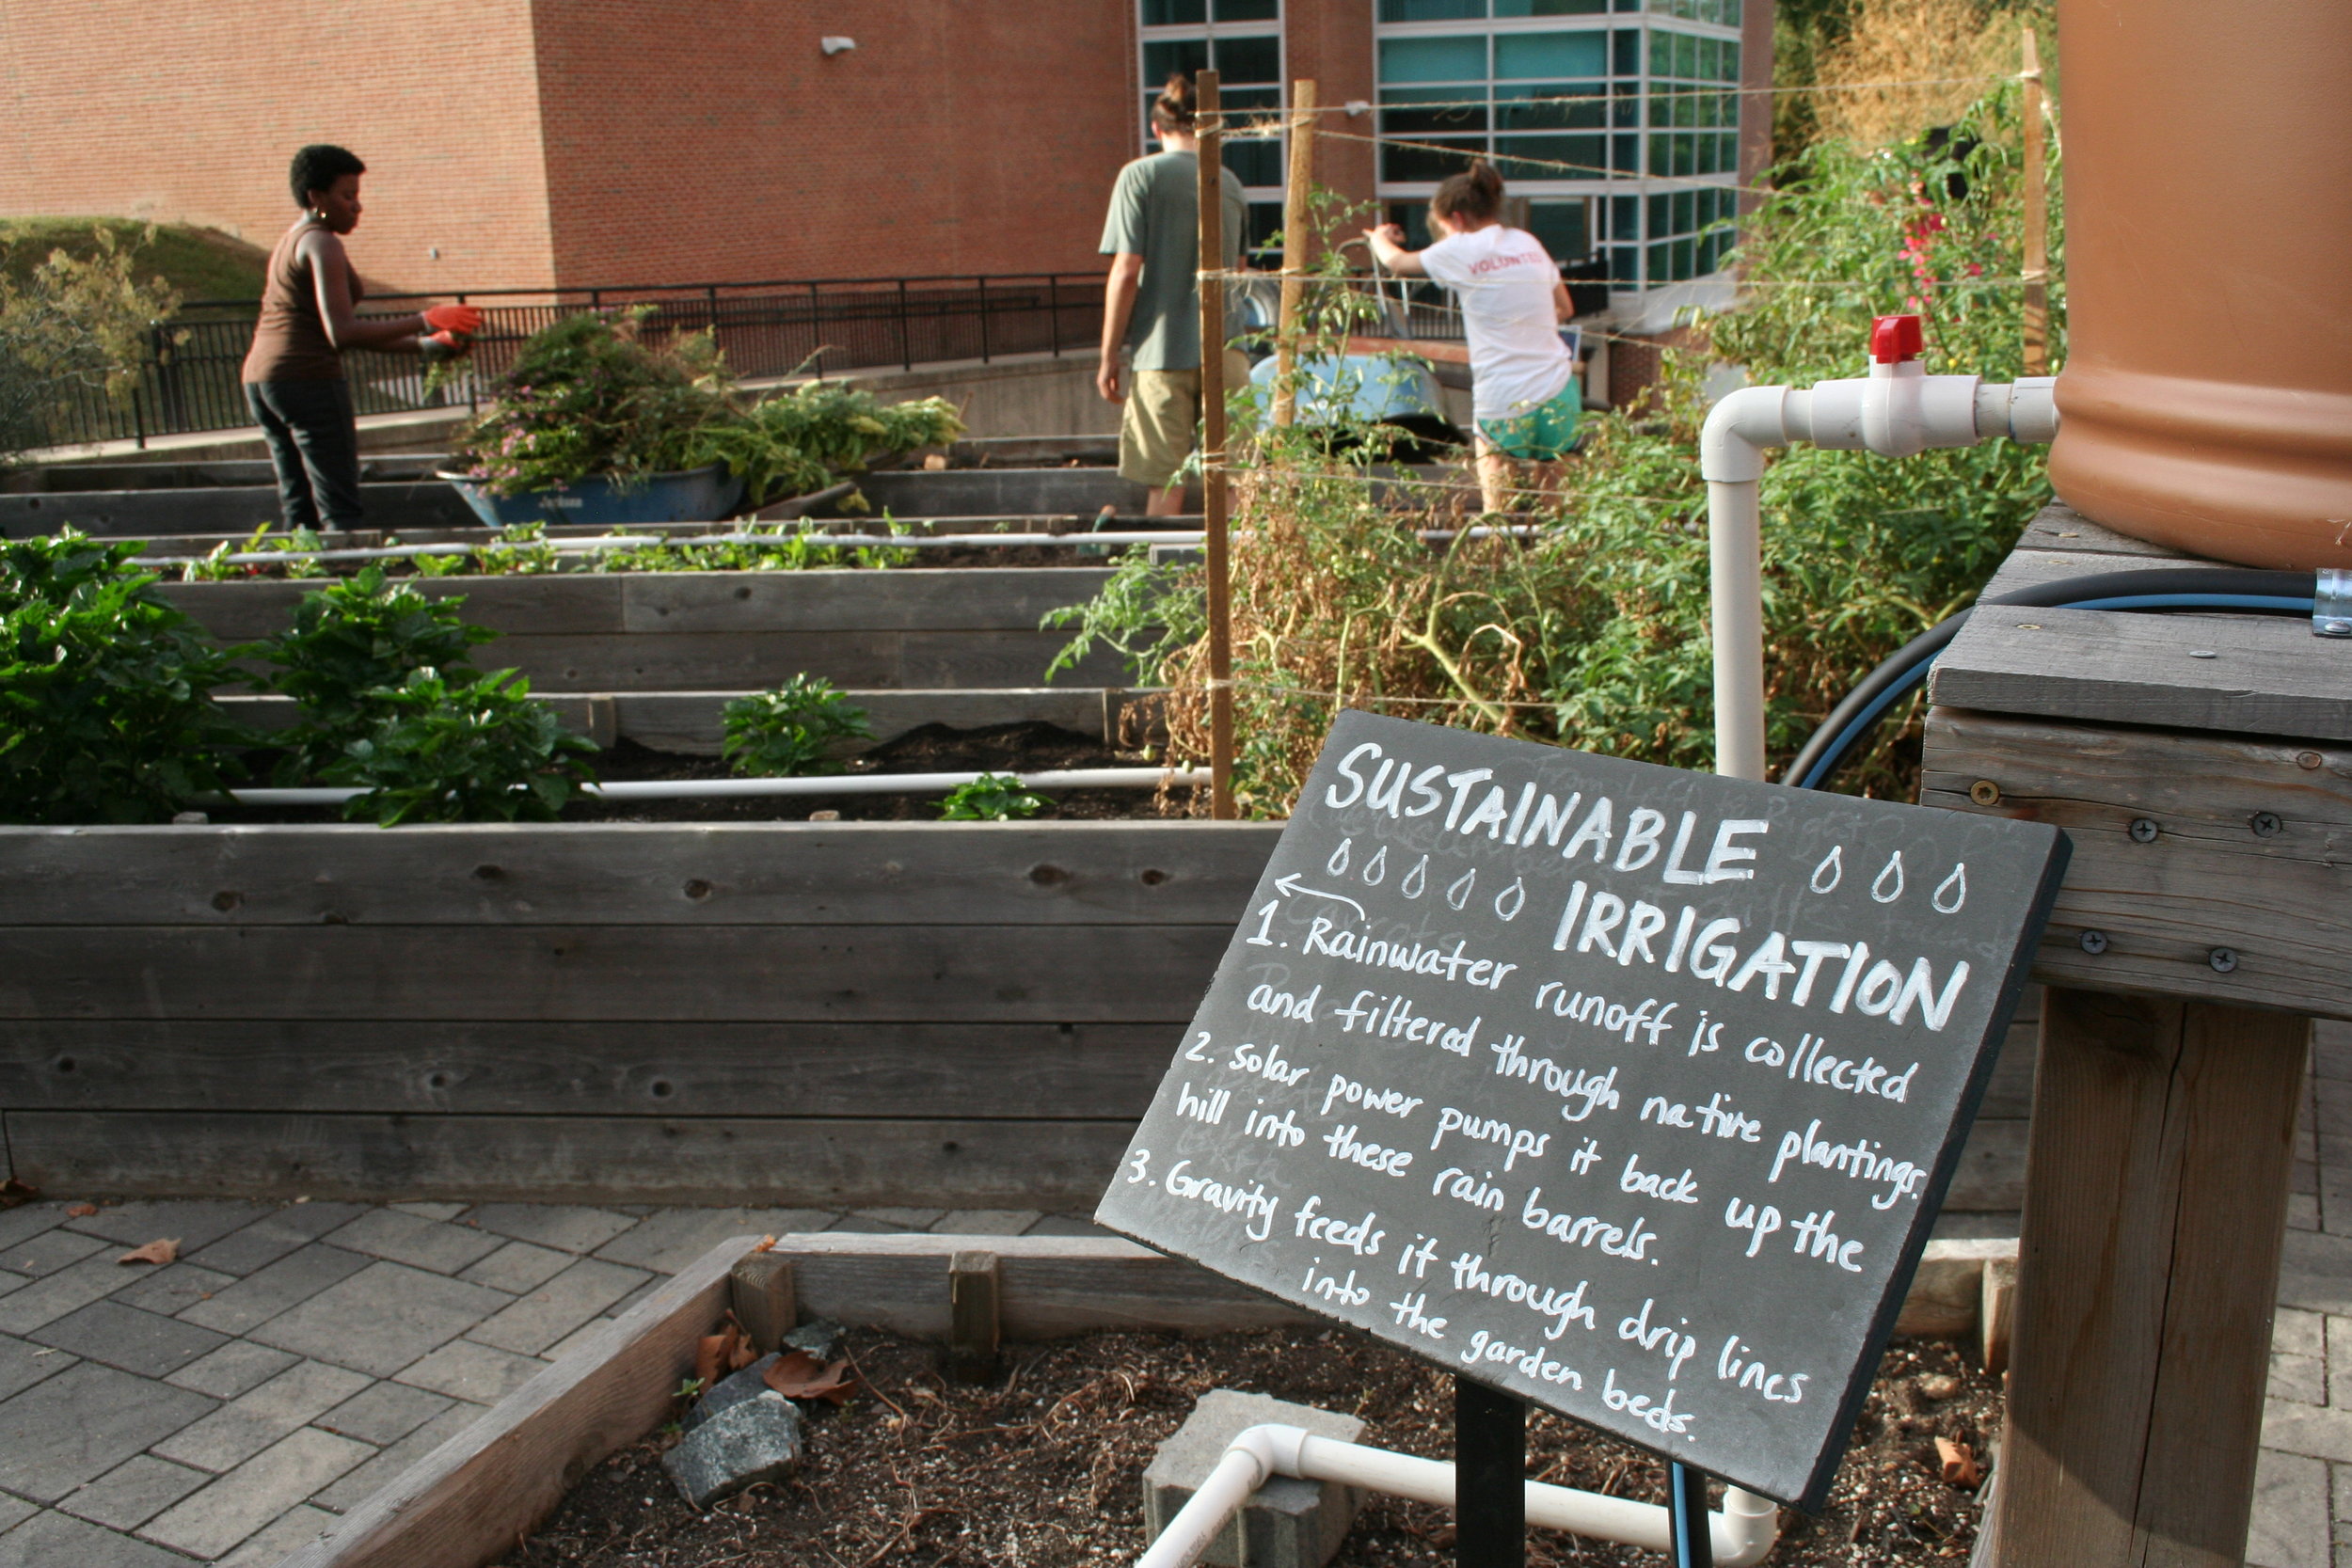  Students work in the garden terrace in preparation for the fall plants on Sept. 28, 2015. The garden was recently terraced in the spring of 2015. The club focuses on sustainable gardening practices, such as the irrigation described in the above sign